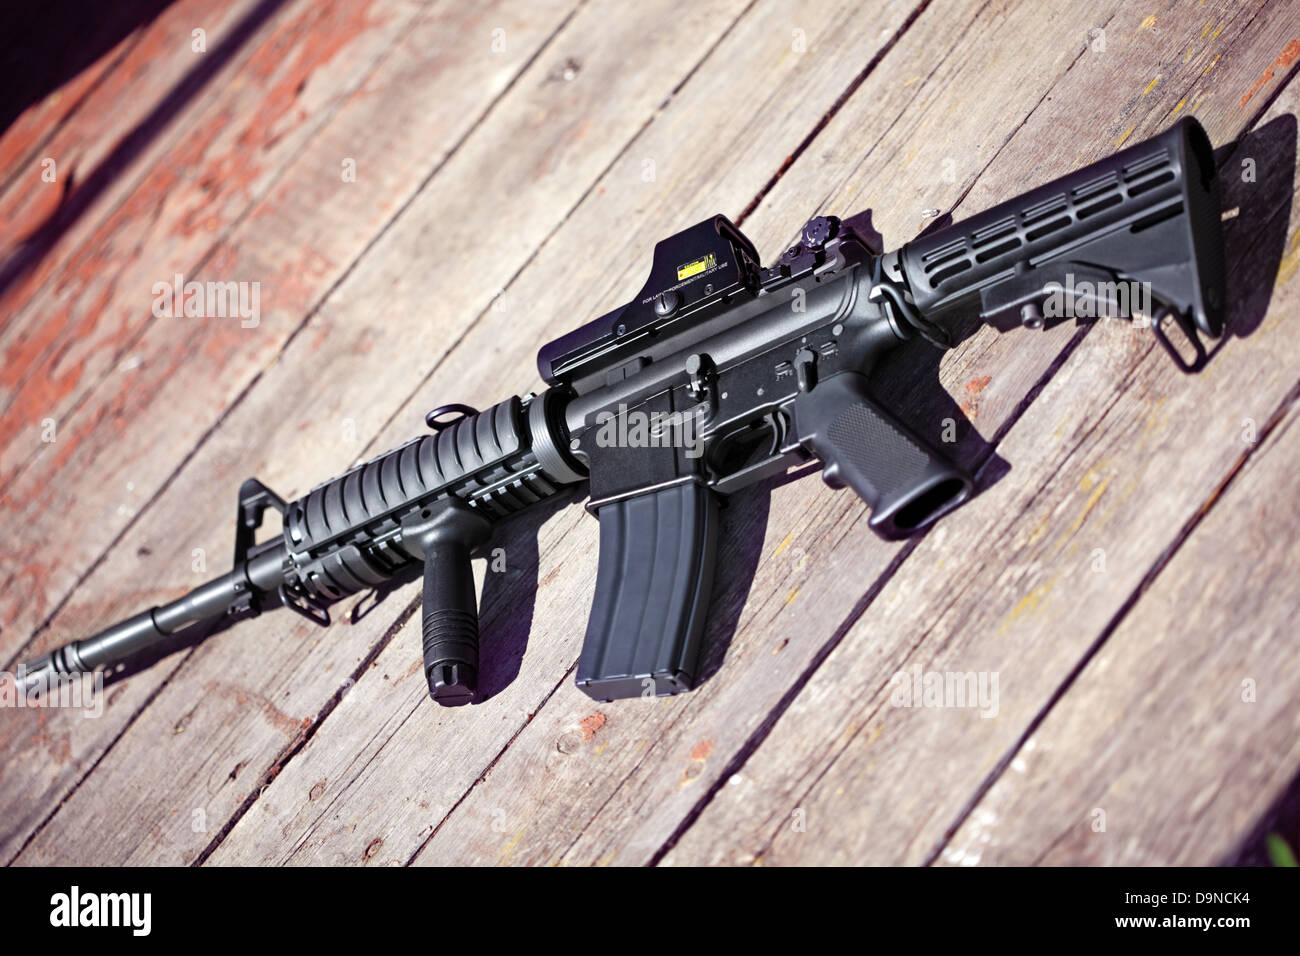 The Black Rifle. AR-15 assault carbine (M4A1) on a wooden surface. Shallow DOF. Stock Photo